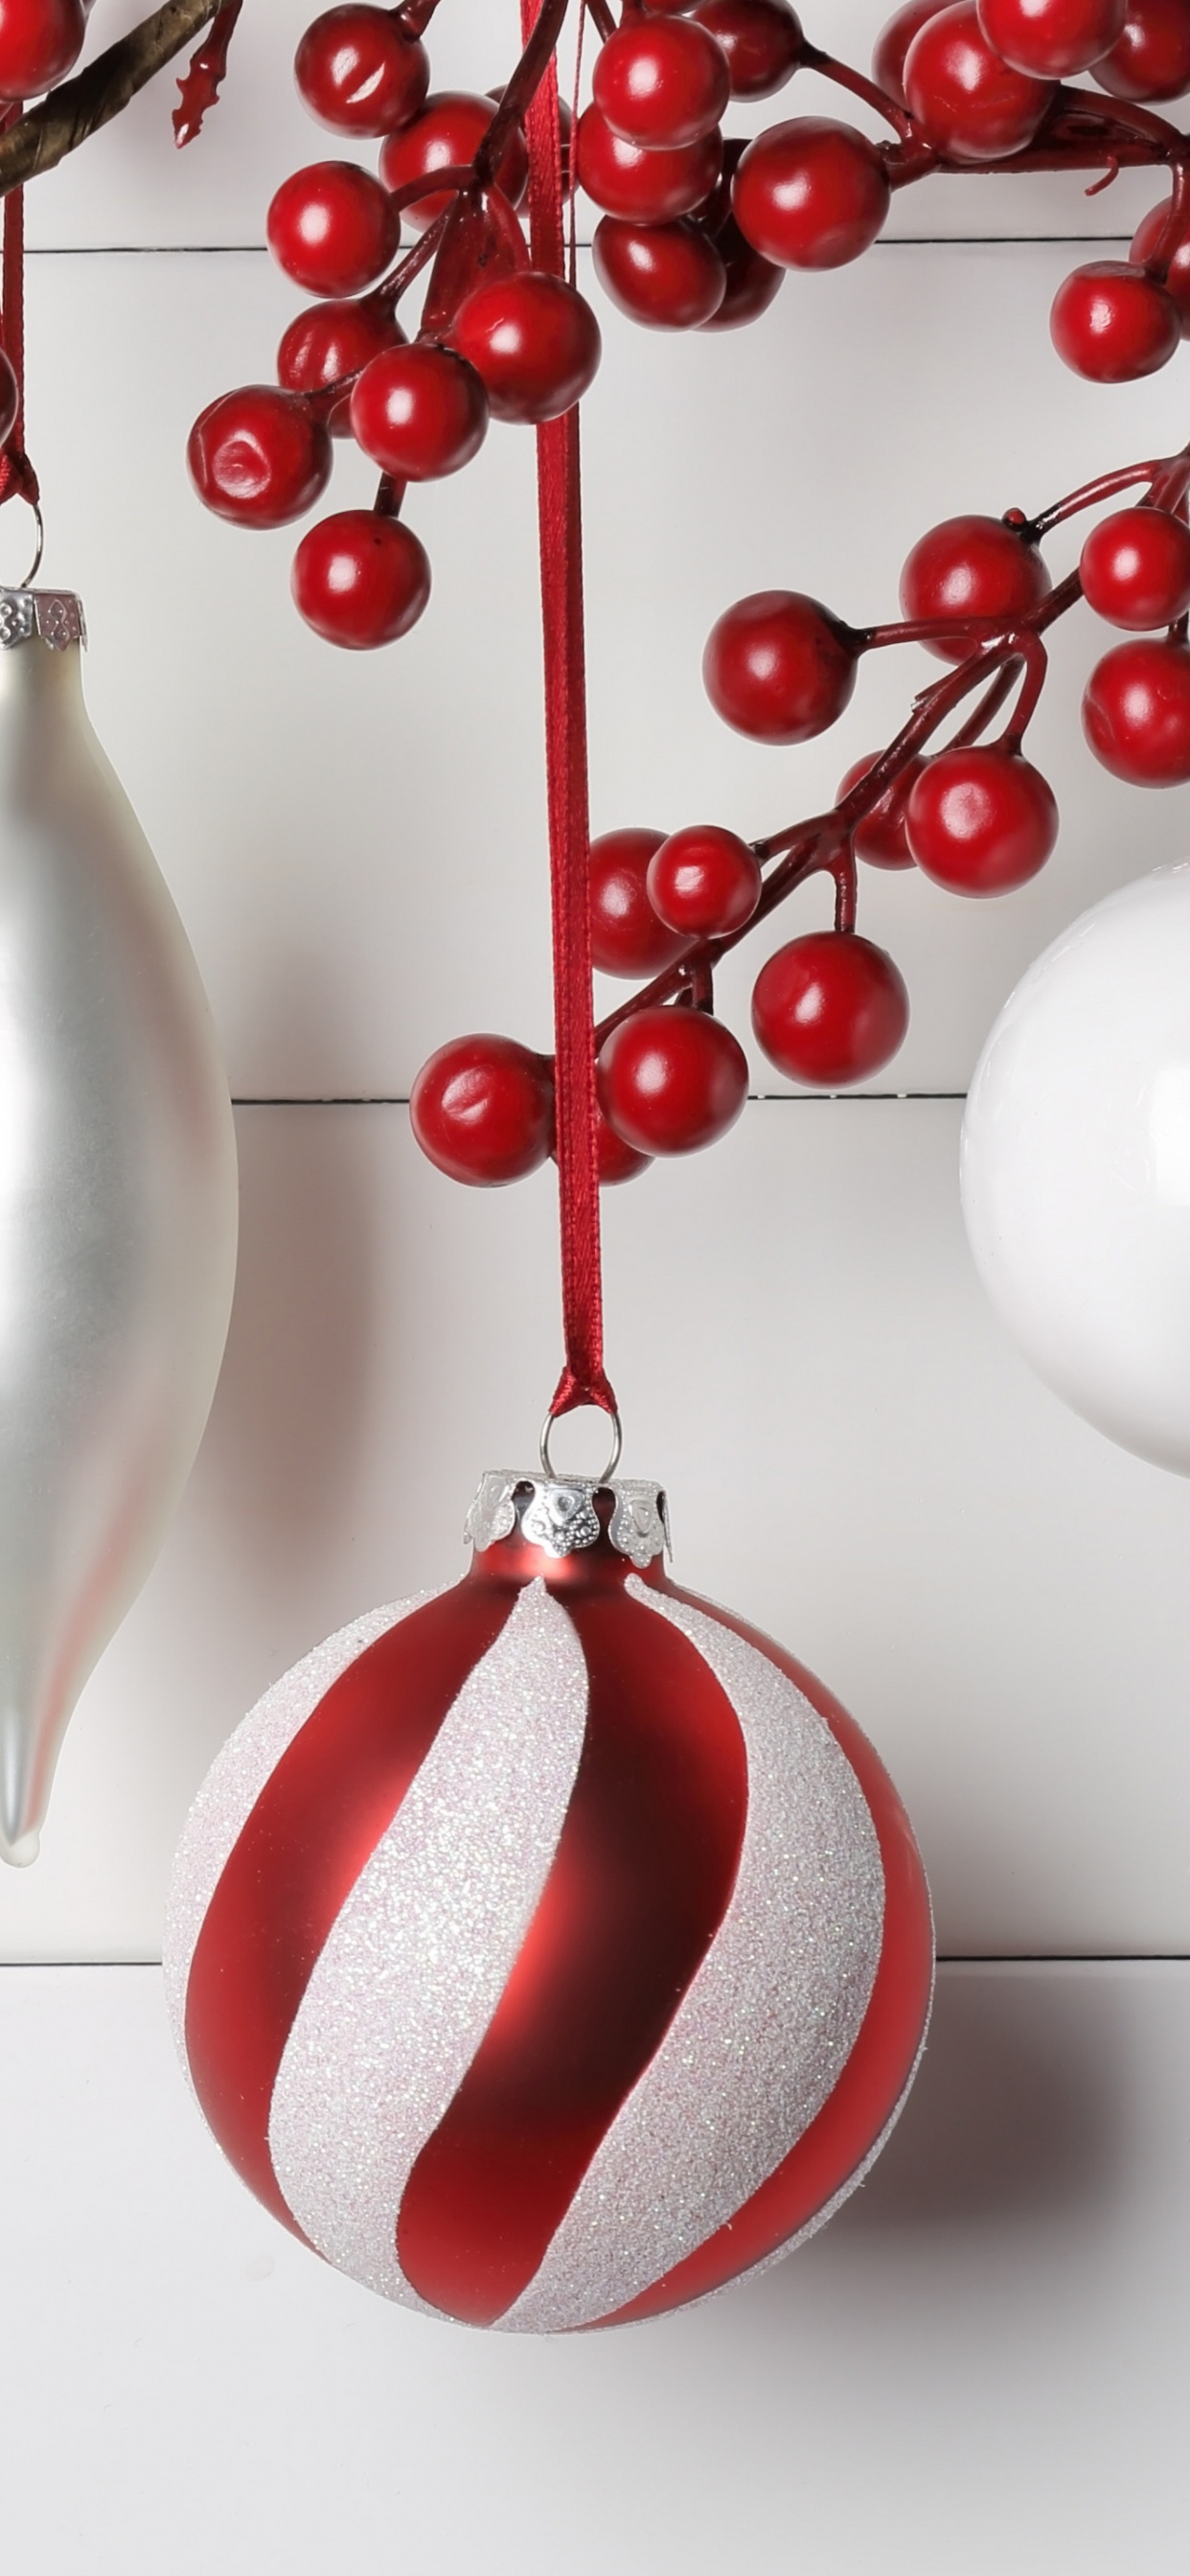 Christmas Day, Christmas Ornament, Christmas Decoration, New Year, Red. Wallpaper in 1242x2688 Resolution